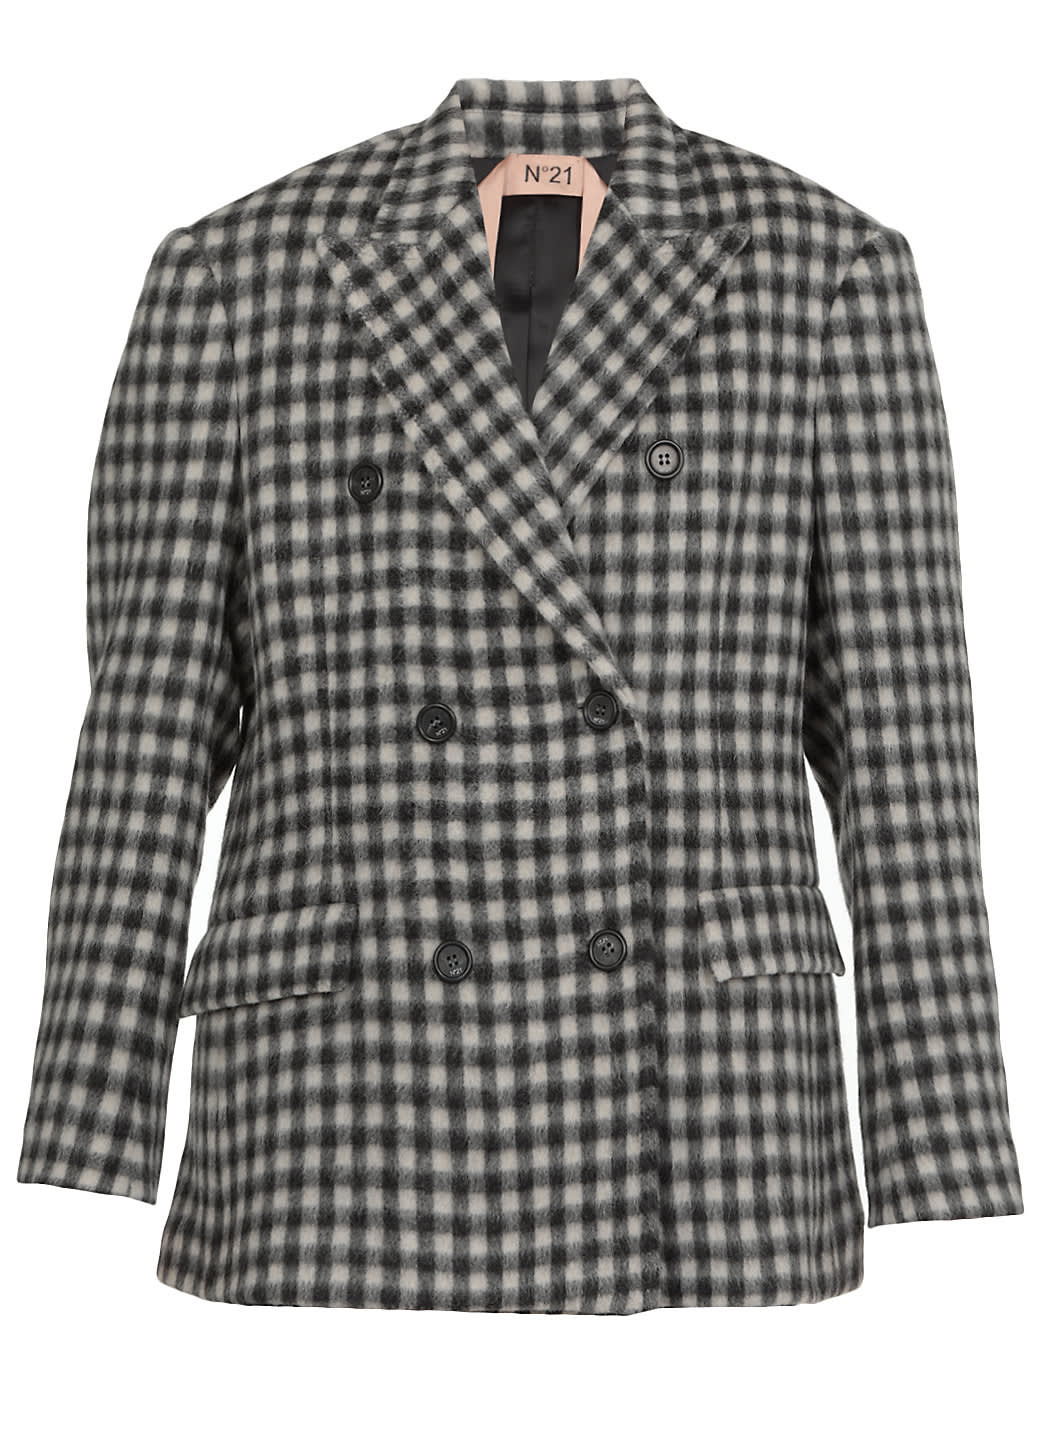 N.21 Checked Jacket